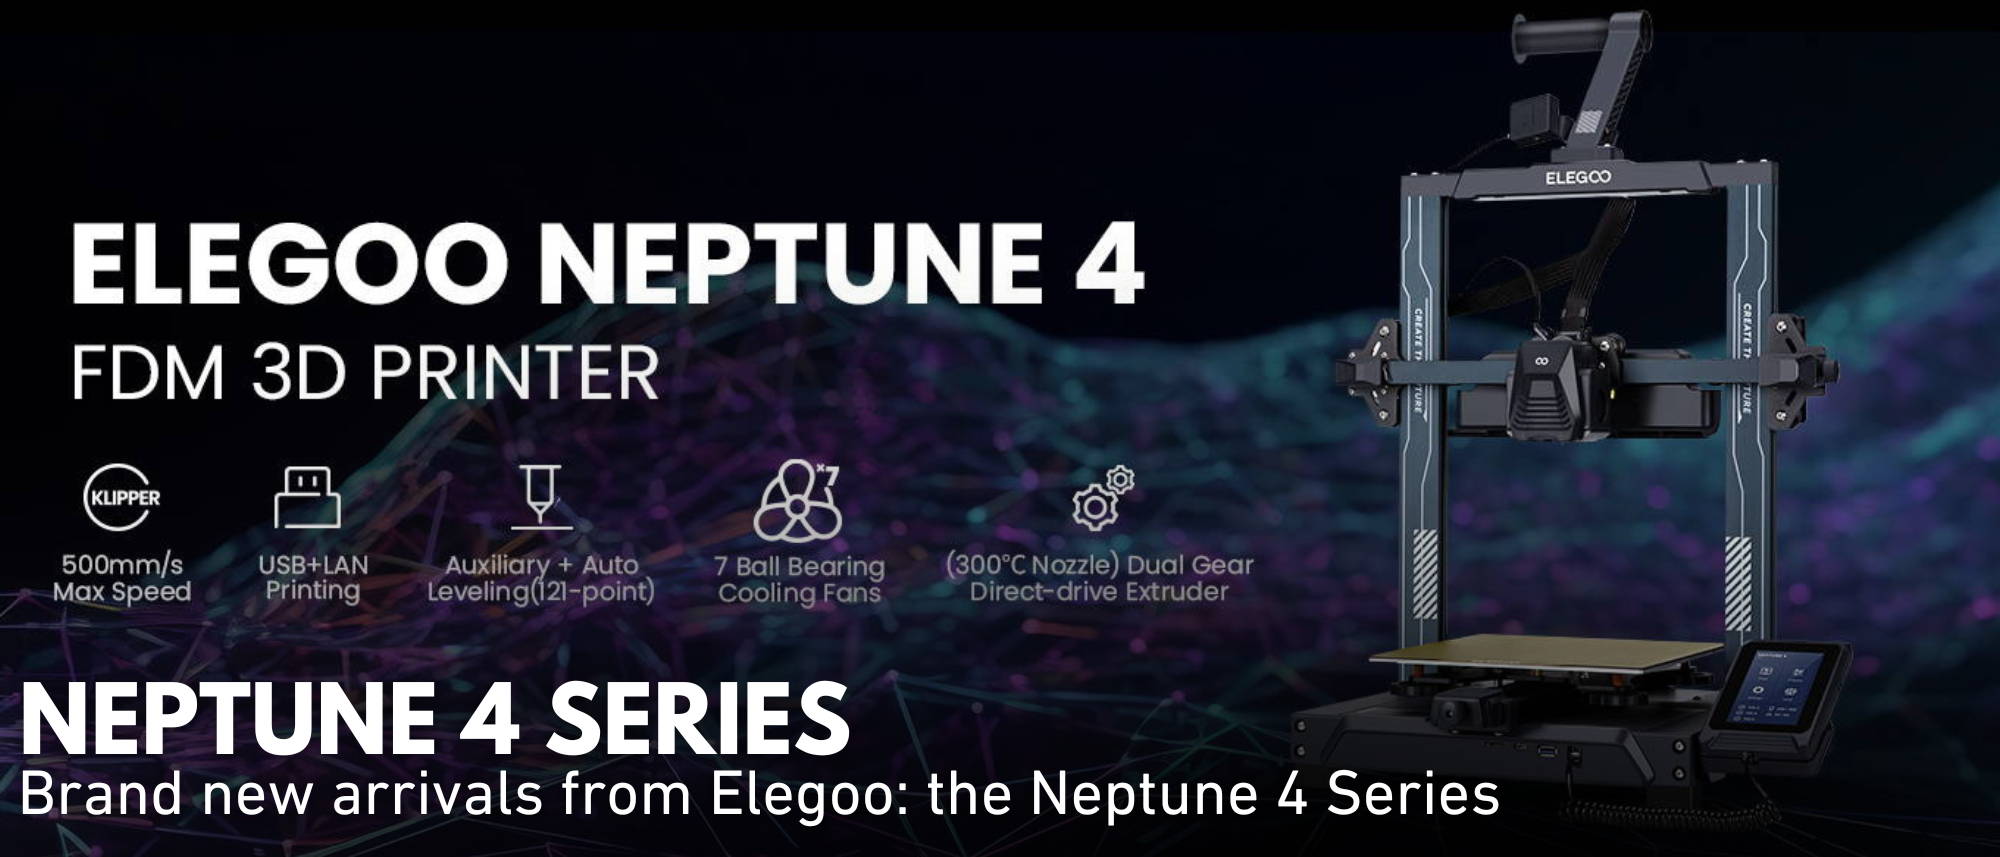 Neptune 4 Printers are available for across Canada shipping from BC Hobbies!